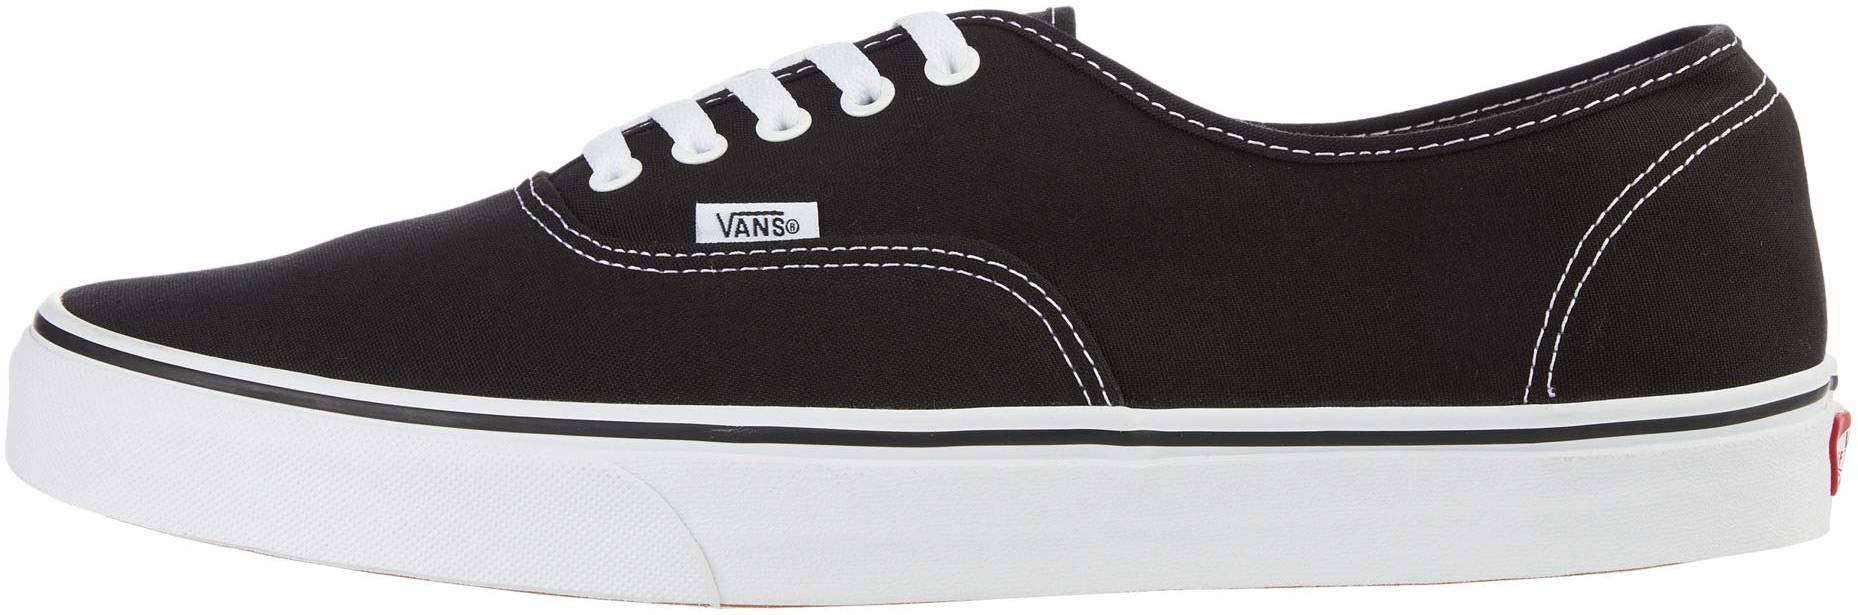 Vans Authentic sneakers in 30 colors (only $29) | RunRepeat